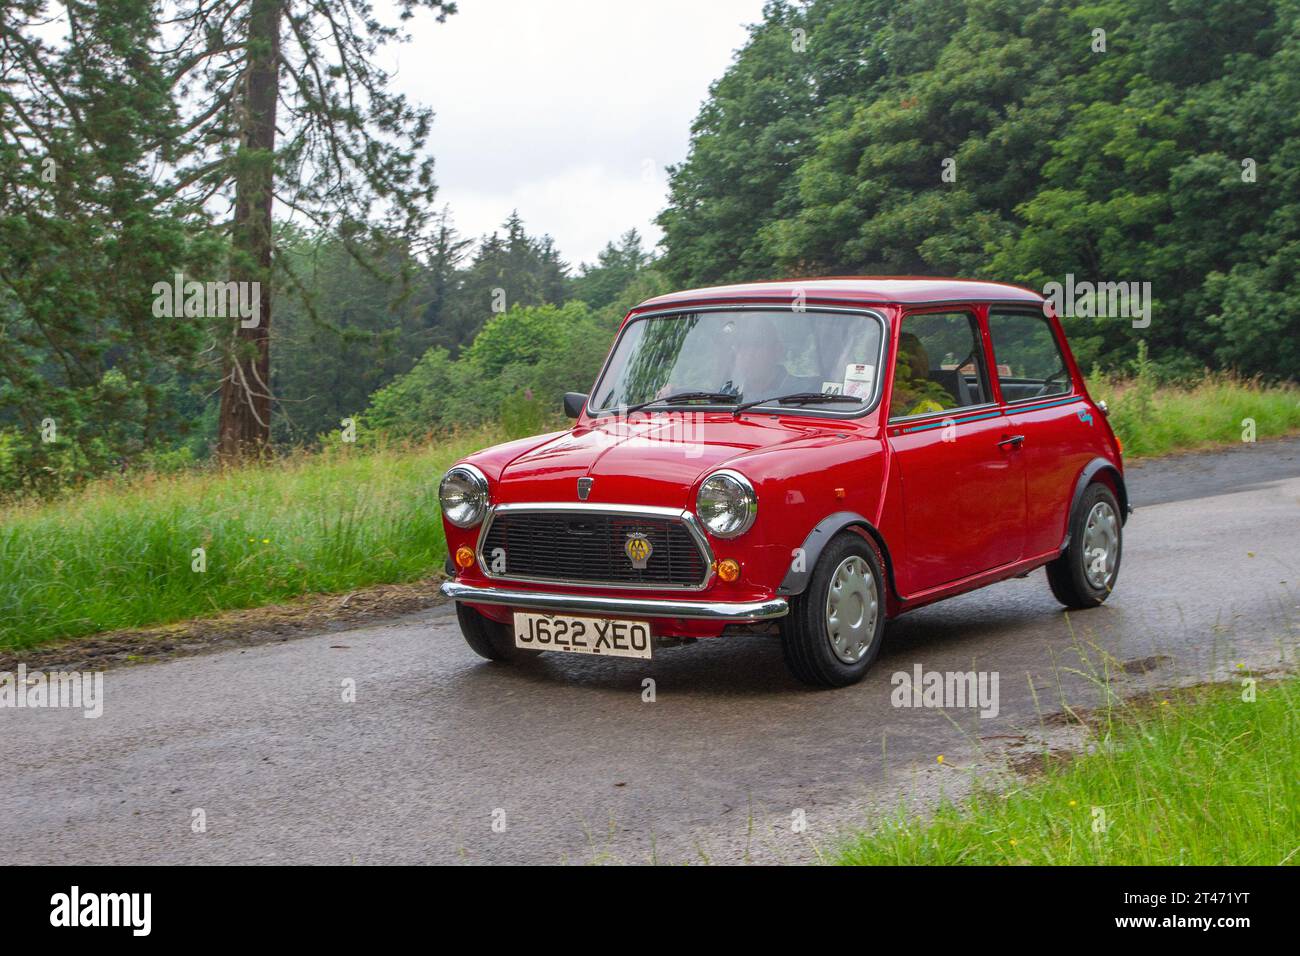 1992 90s nineties Rover Mini1000 City E, a small, two-door, four-seat car, developed as ADO15, and produced by the British Motor Corporation (BMC); arriving at Holker Hall vintage and classic car show, UK Stock Photo